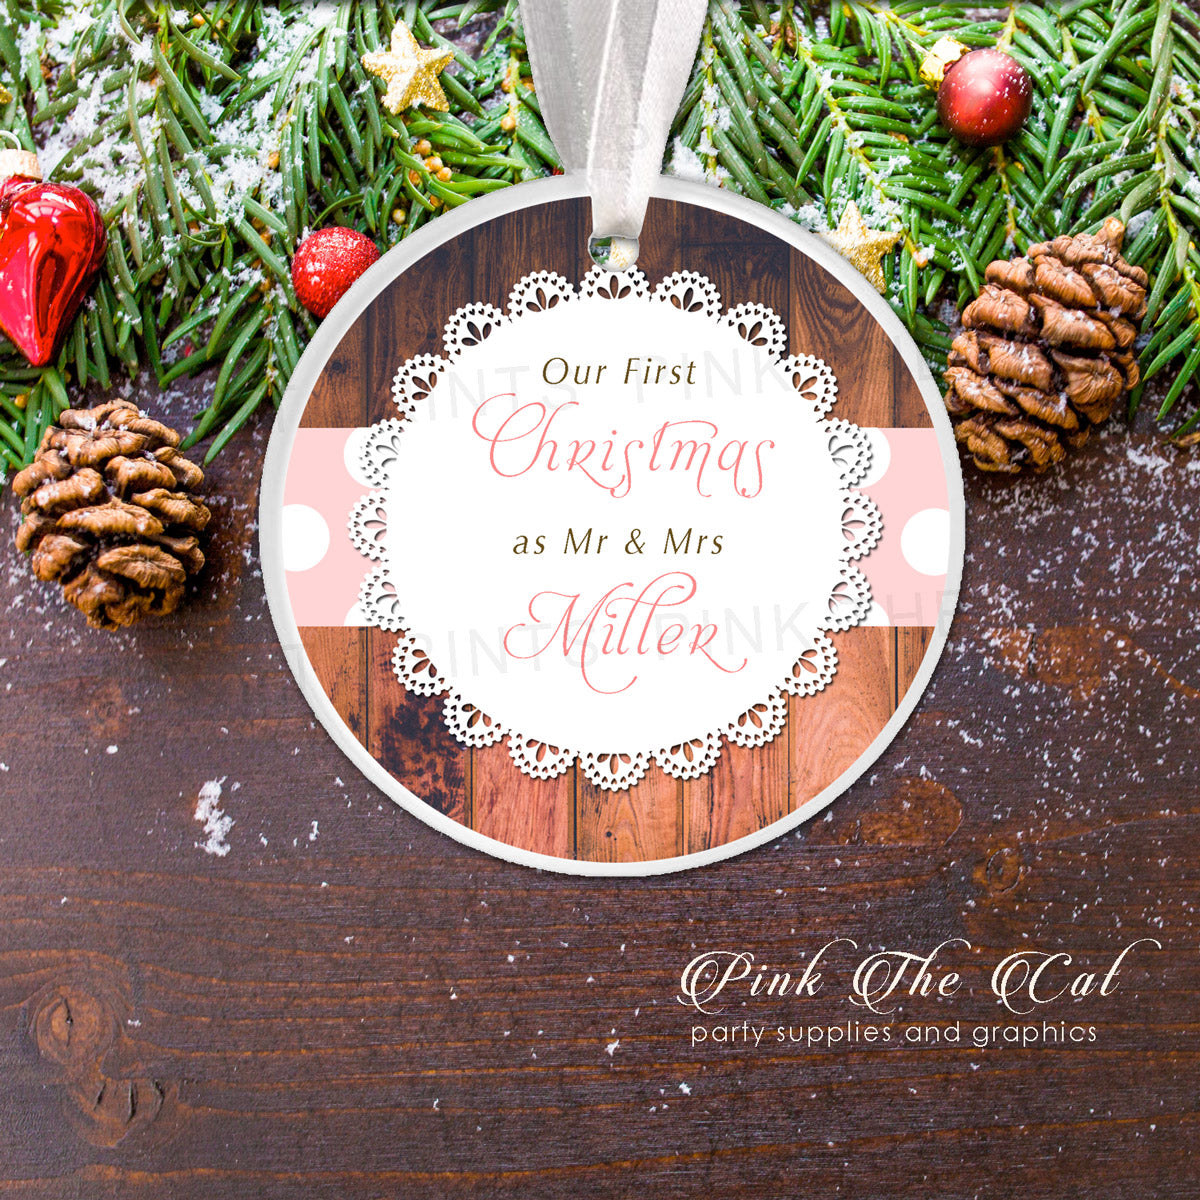 Personalized Christmas ornament rustic blush pink lace